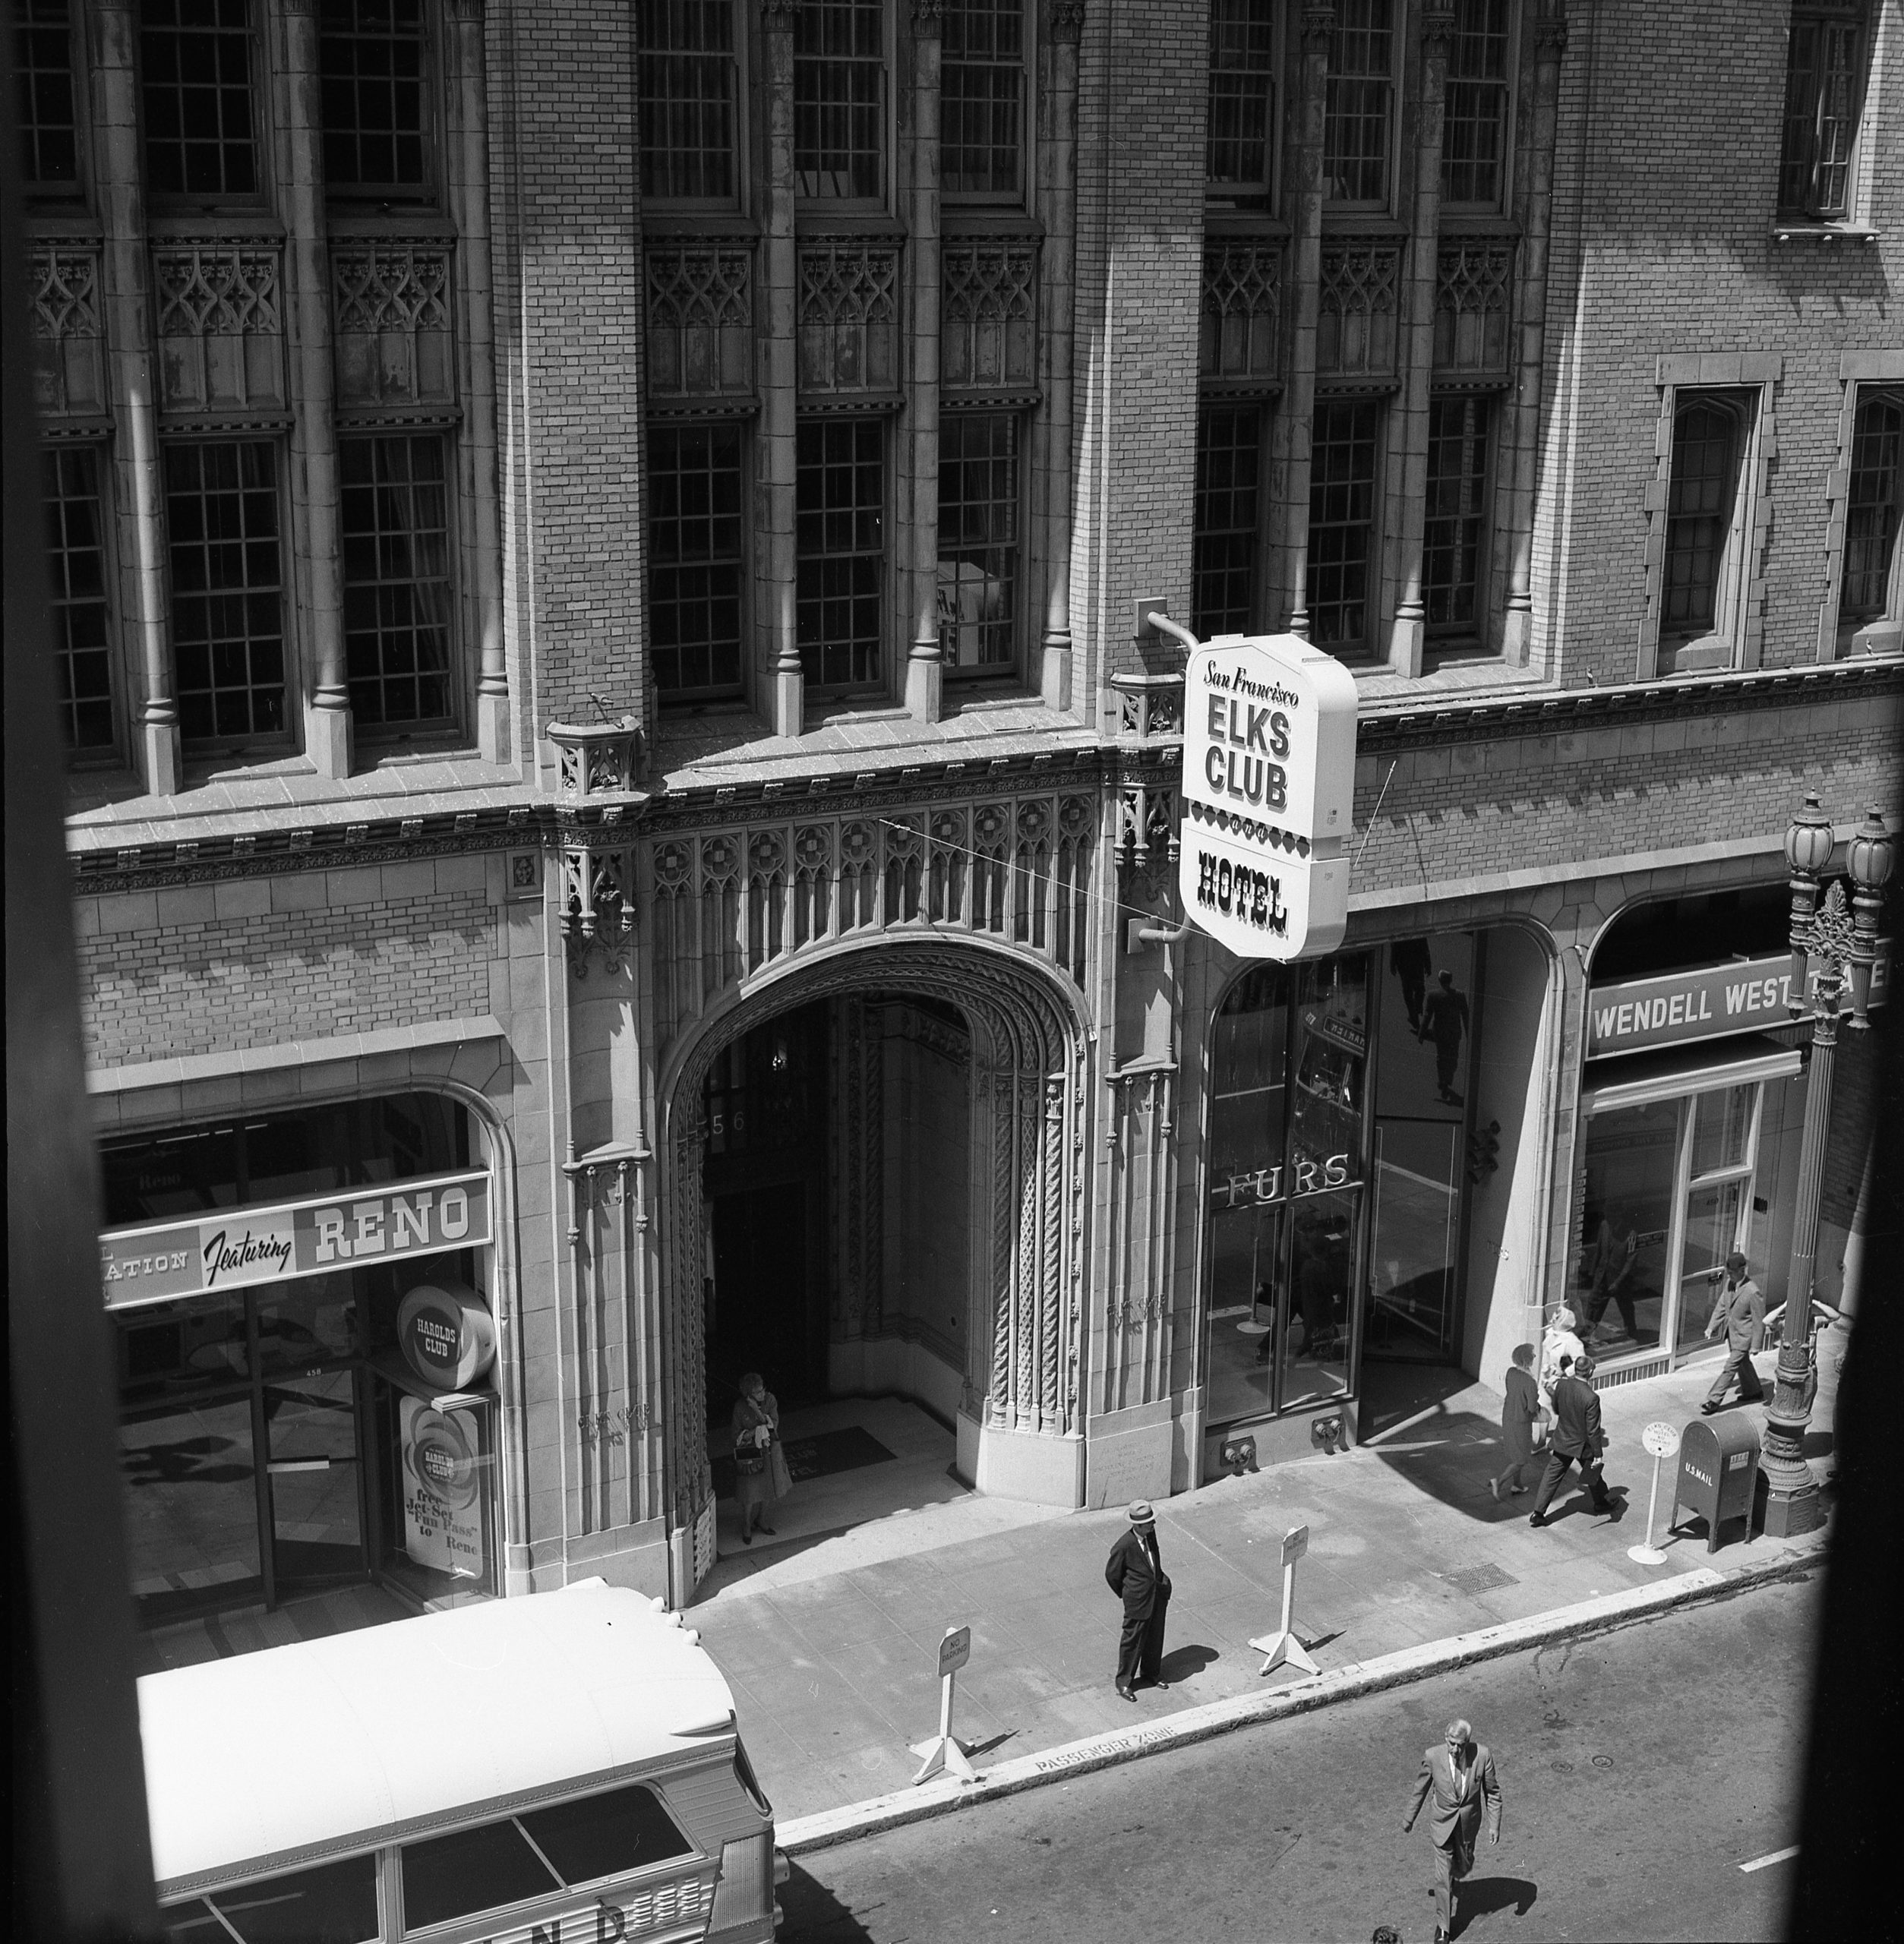 A view of the front of San Francisco Lodge No. 3 of the Benevolent and Protective Order of Elks at 450 Post Street.  The photograph, taken circa 1970, shows a sign with the words "San Francisco Elks Club Hotel"